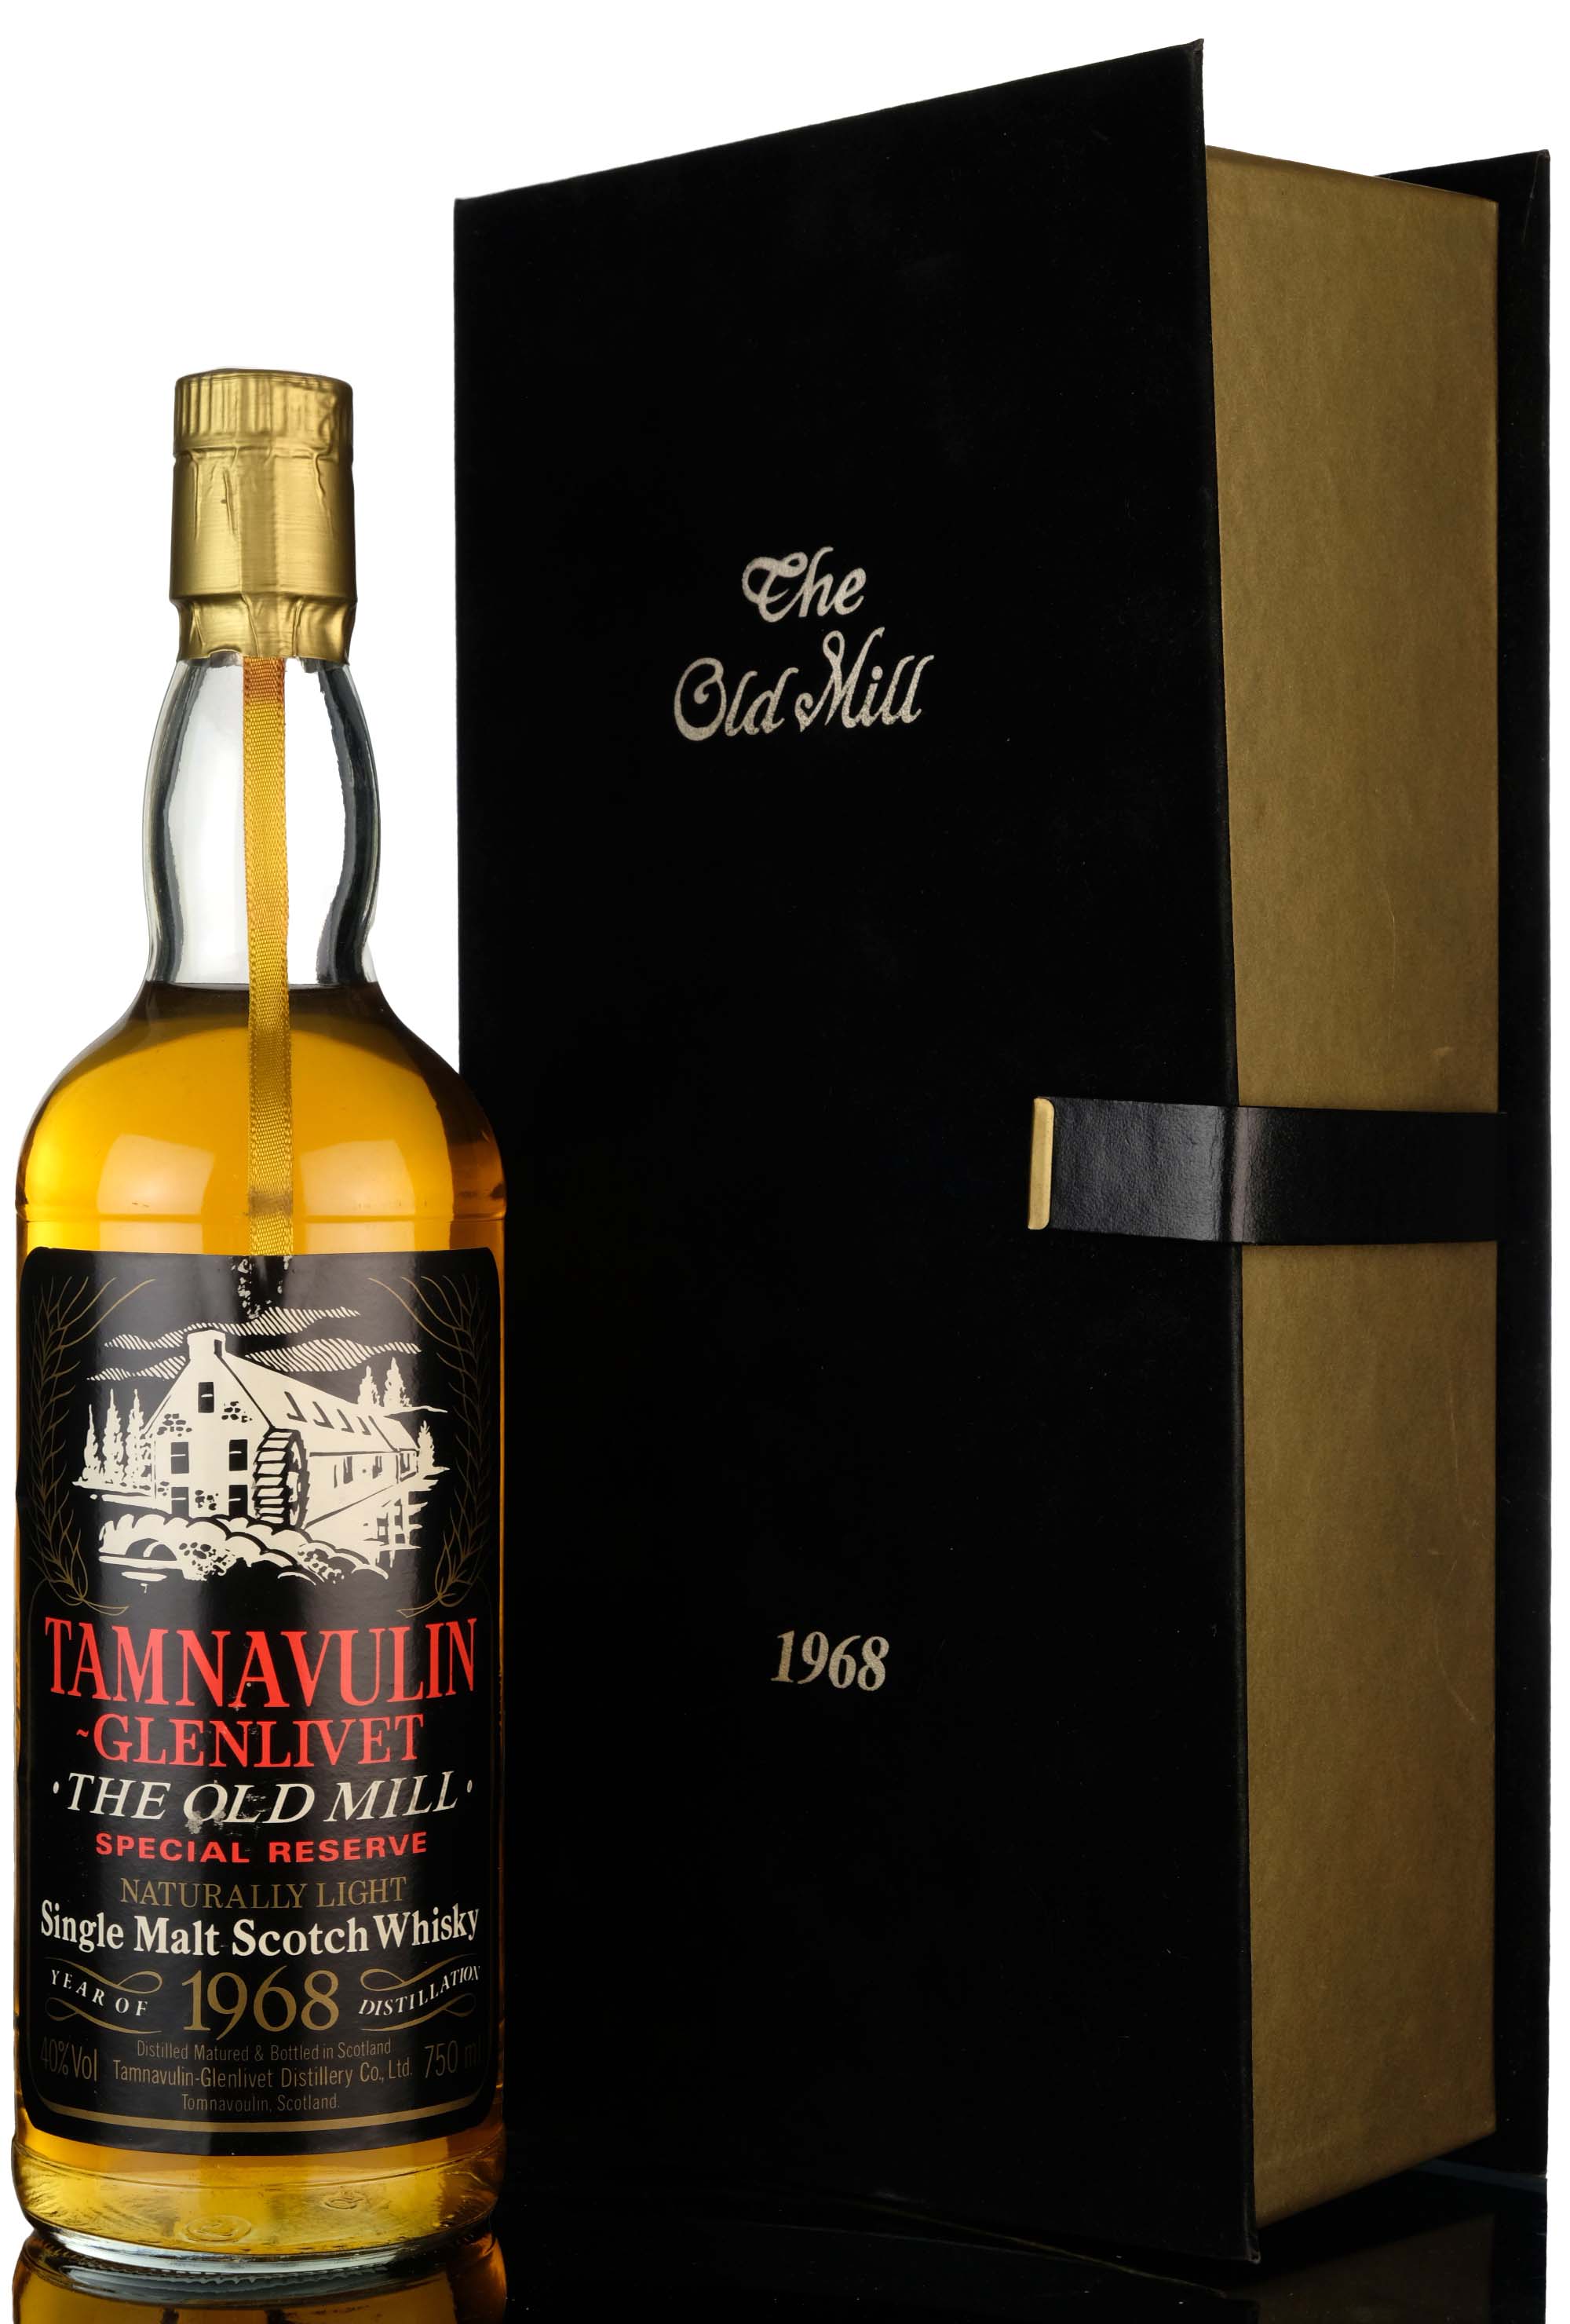 Tamnavulin 1968 - The Old Mill Special Reserve - Casks 2528 & 2531